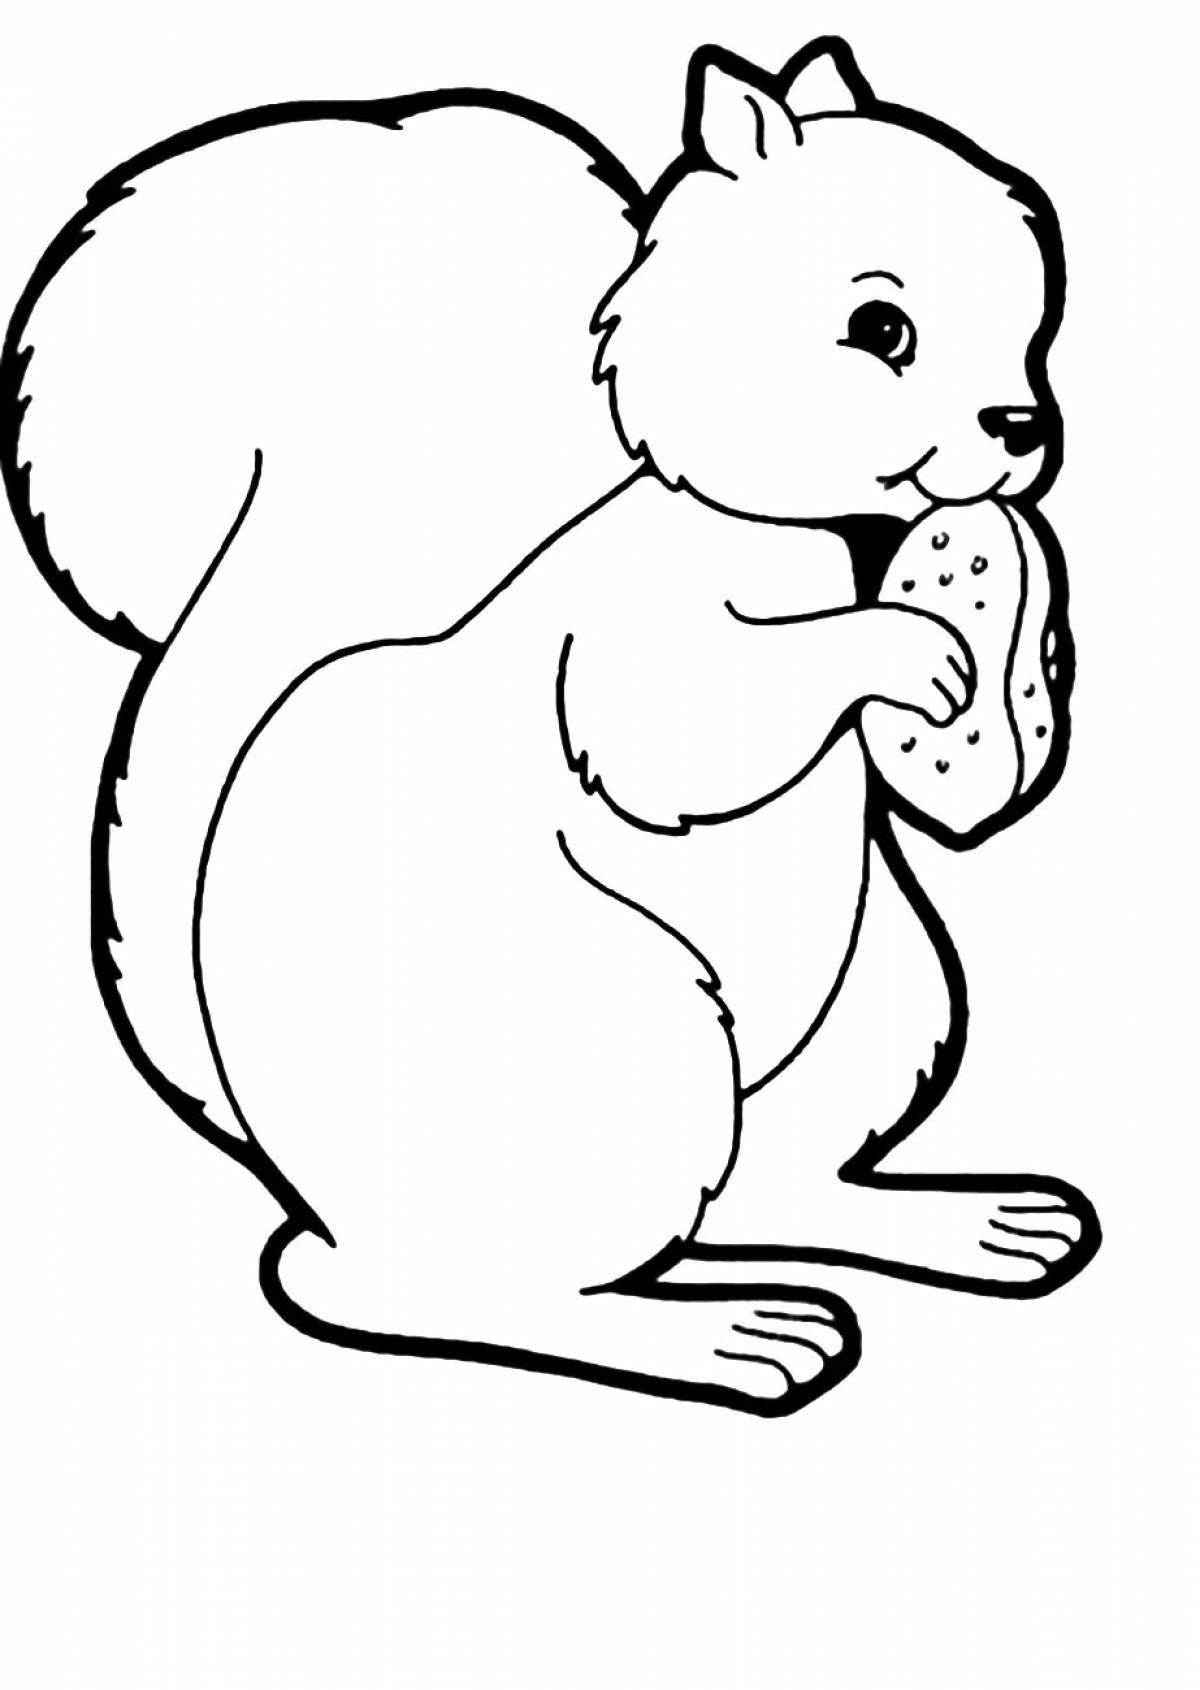 Animated squirrel coloring book for children 2-3 years old